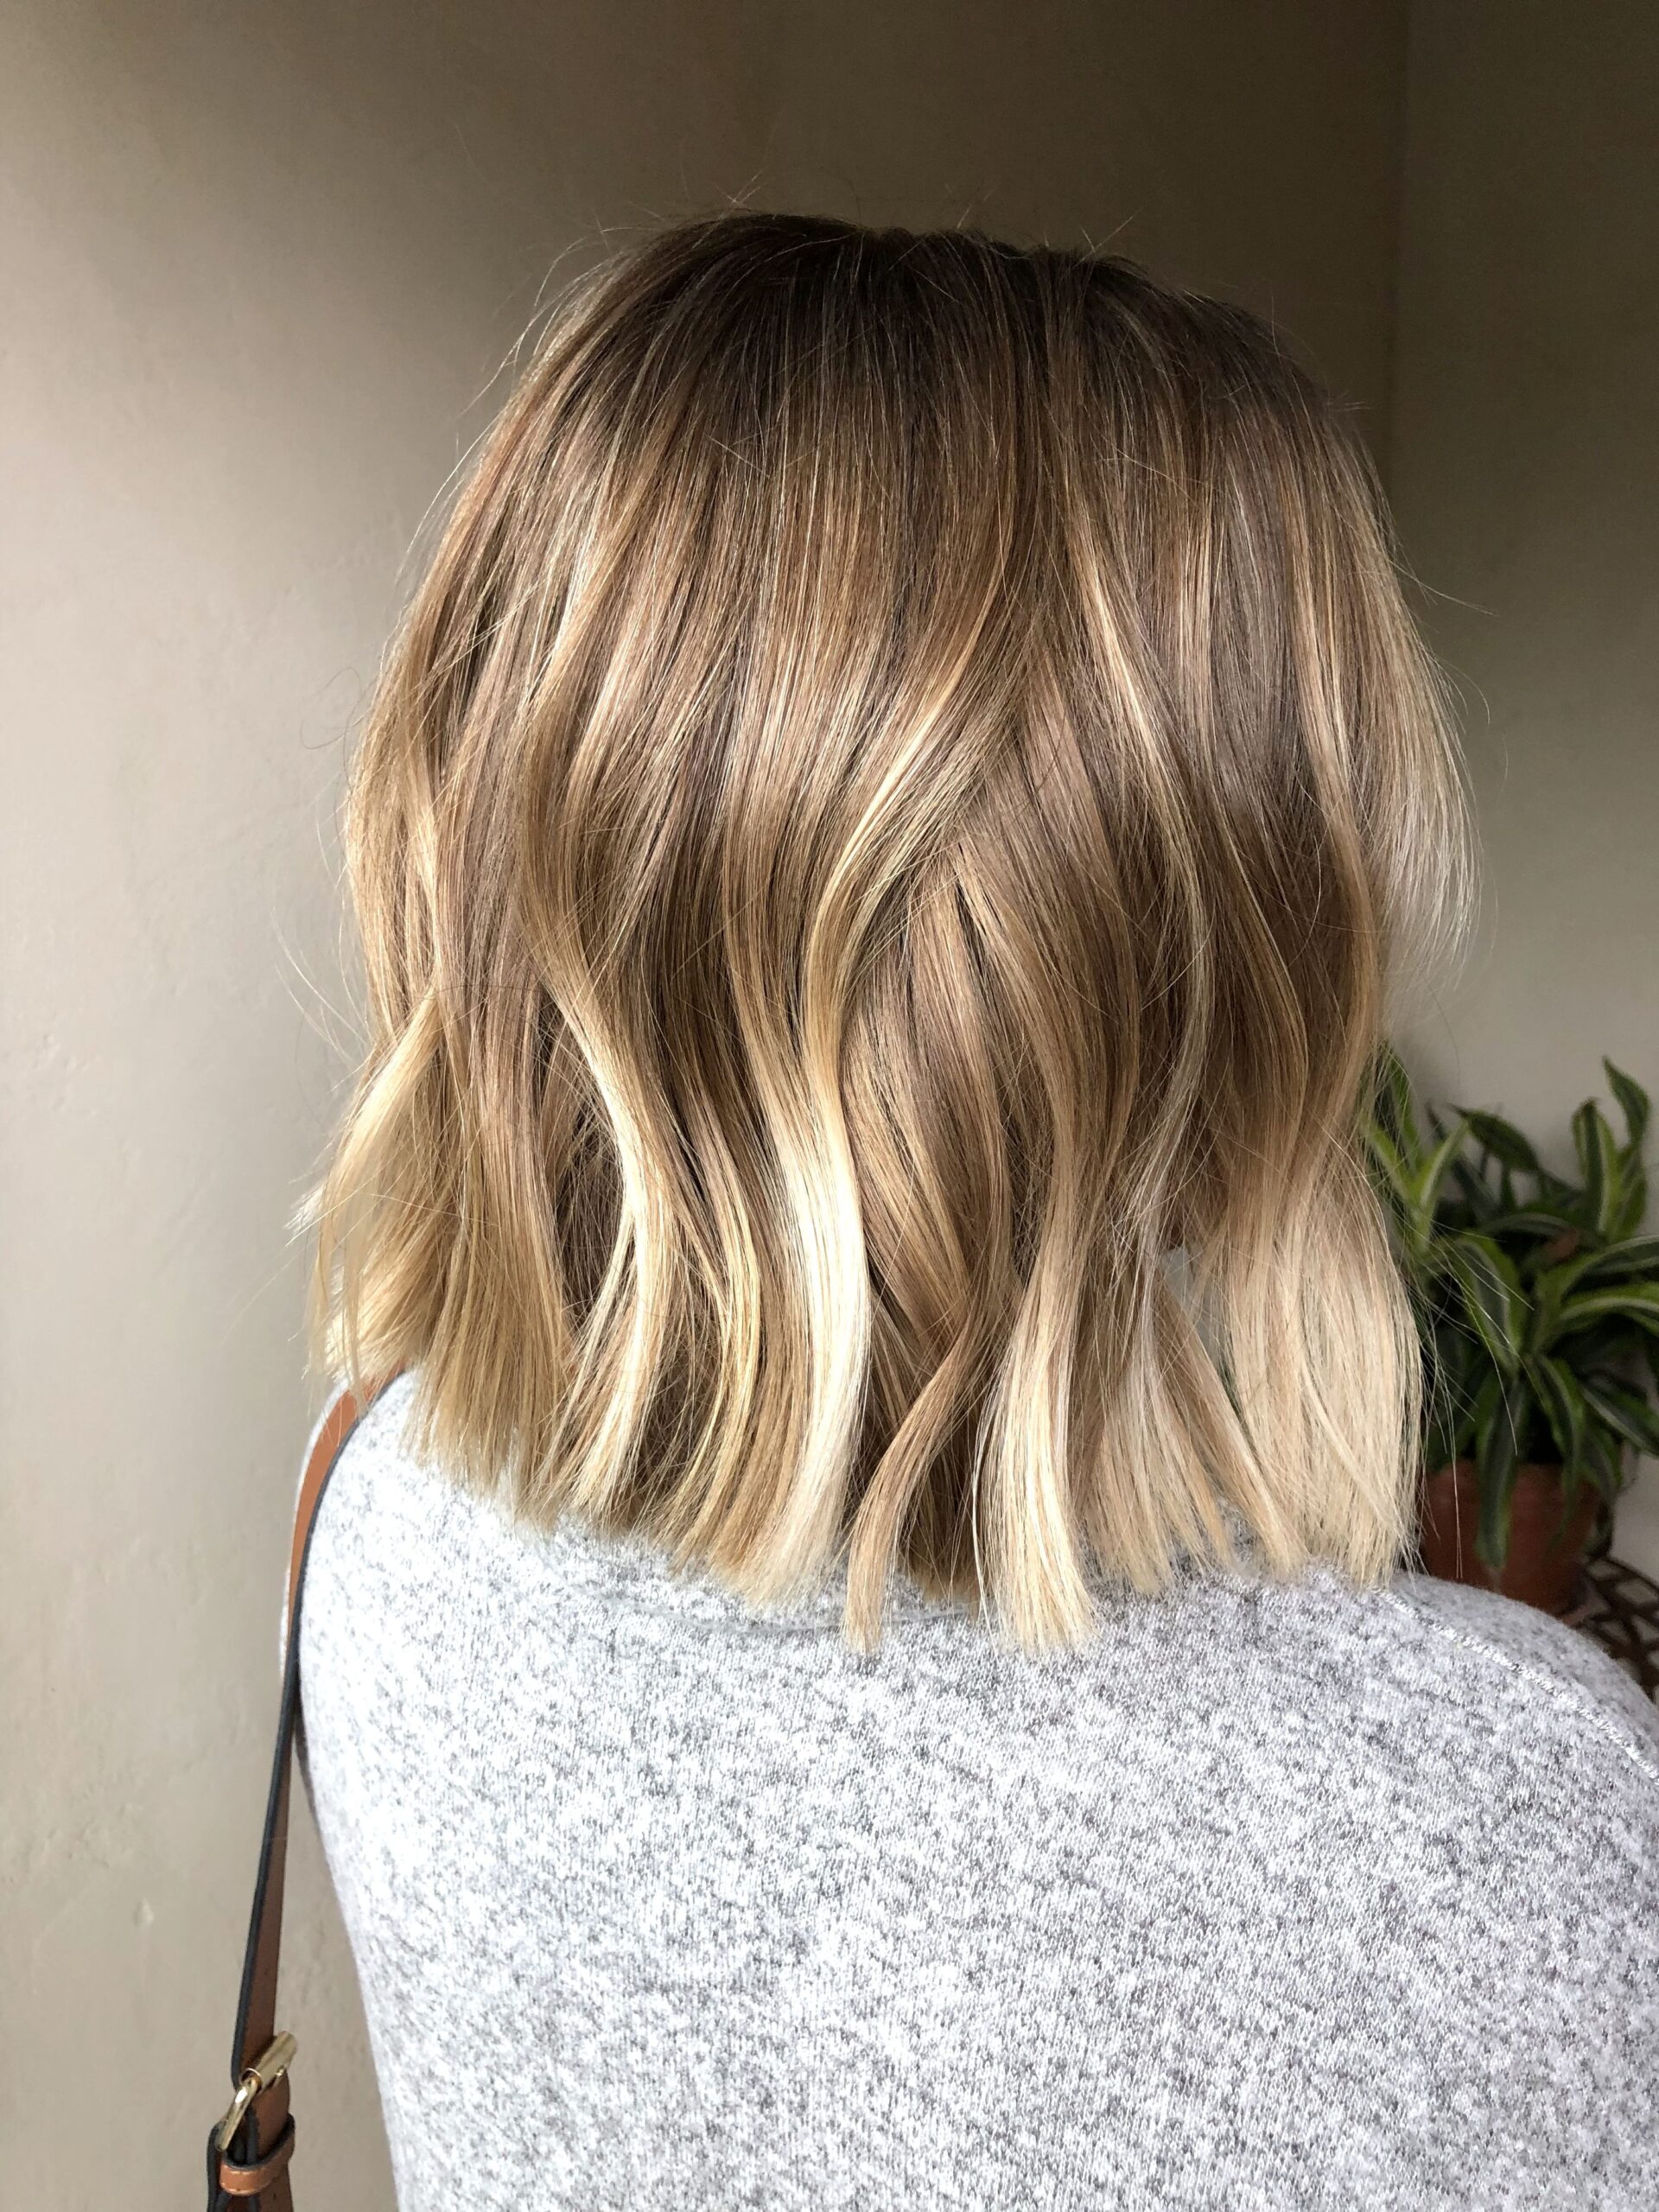 Refresh Your Look with a Blonde Balayage for Short Hair